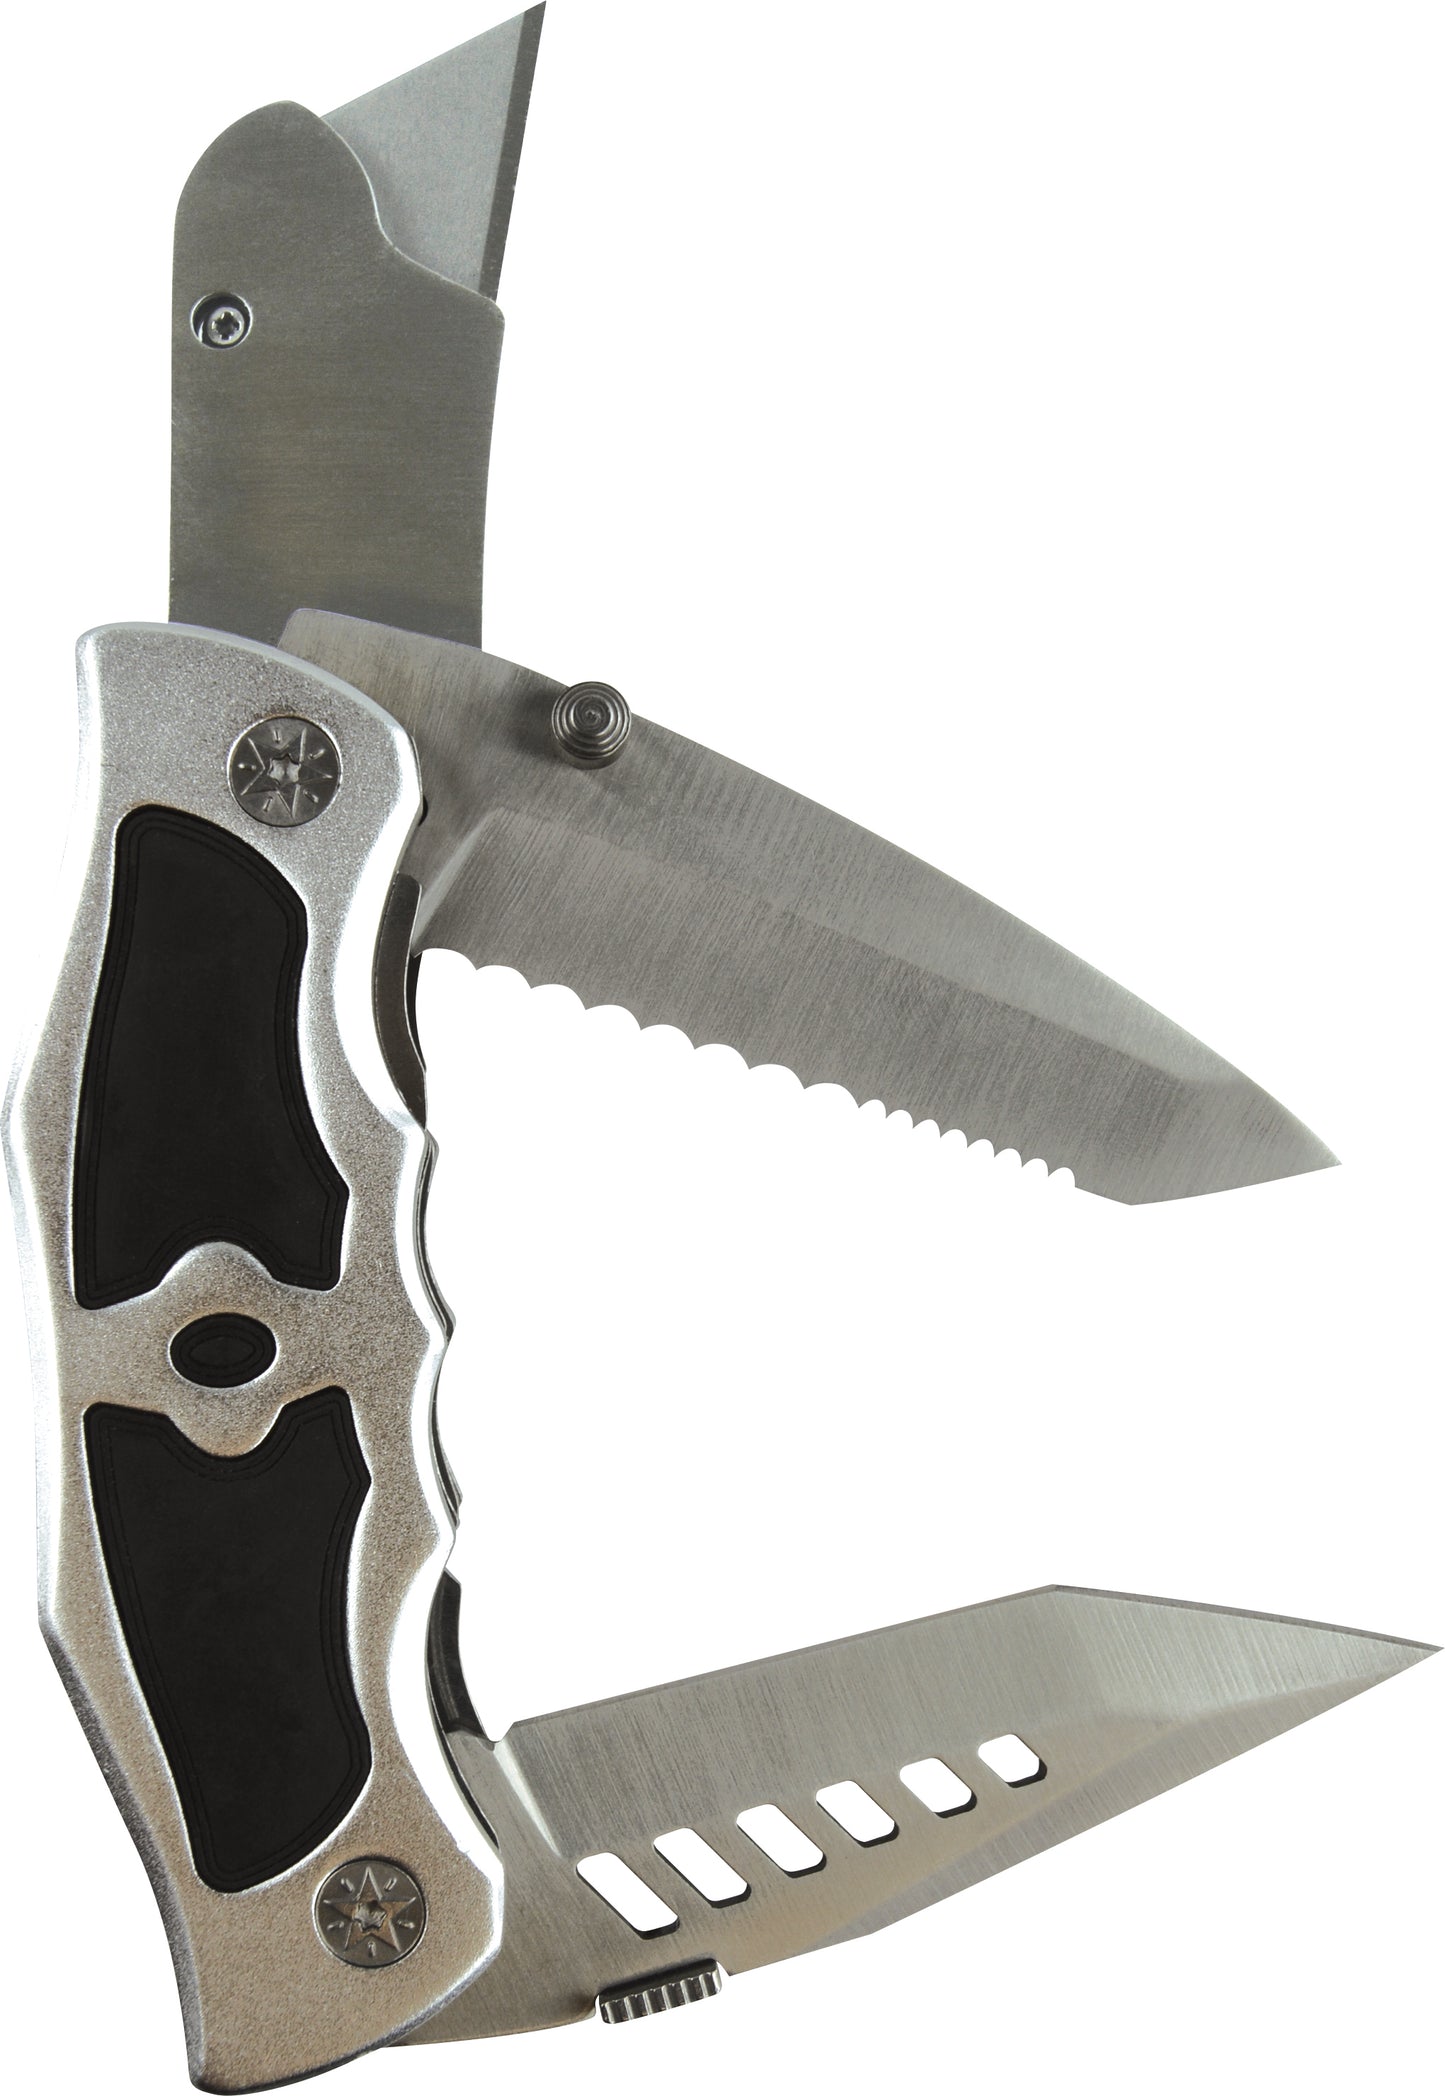 ITEM NUMBER 023388 ROUGHNECK UTILITY KNIFE 6 PIECES PER DISPLAY